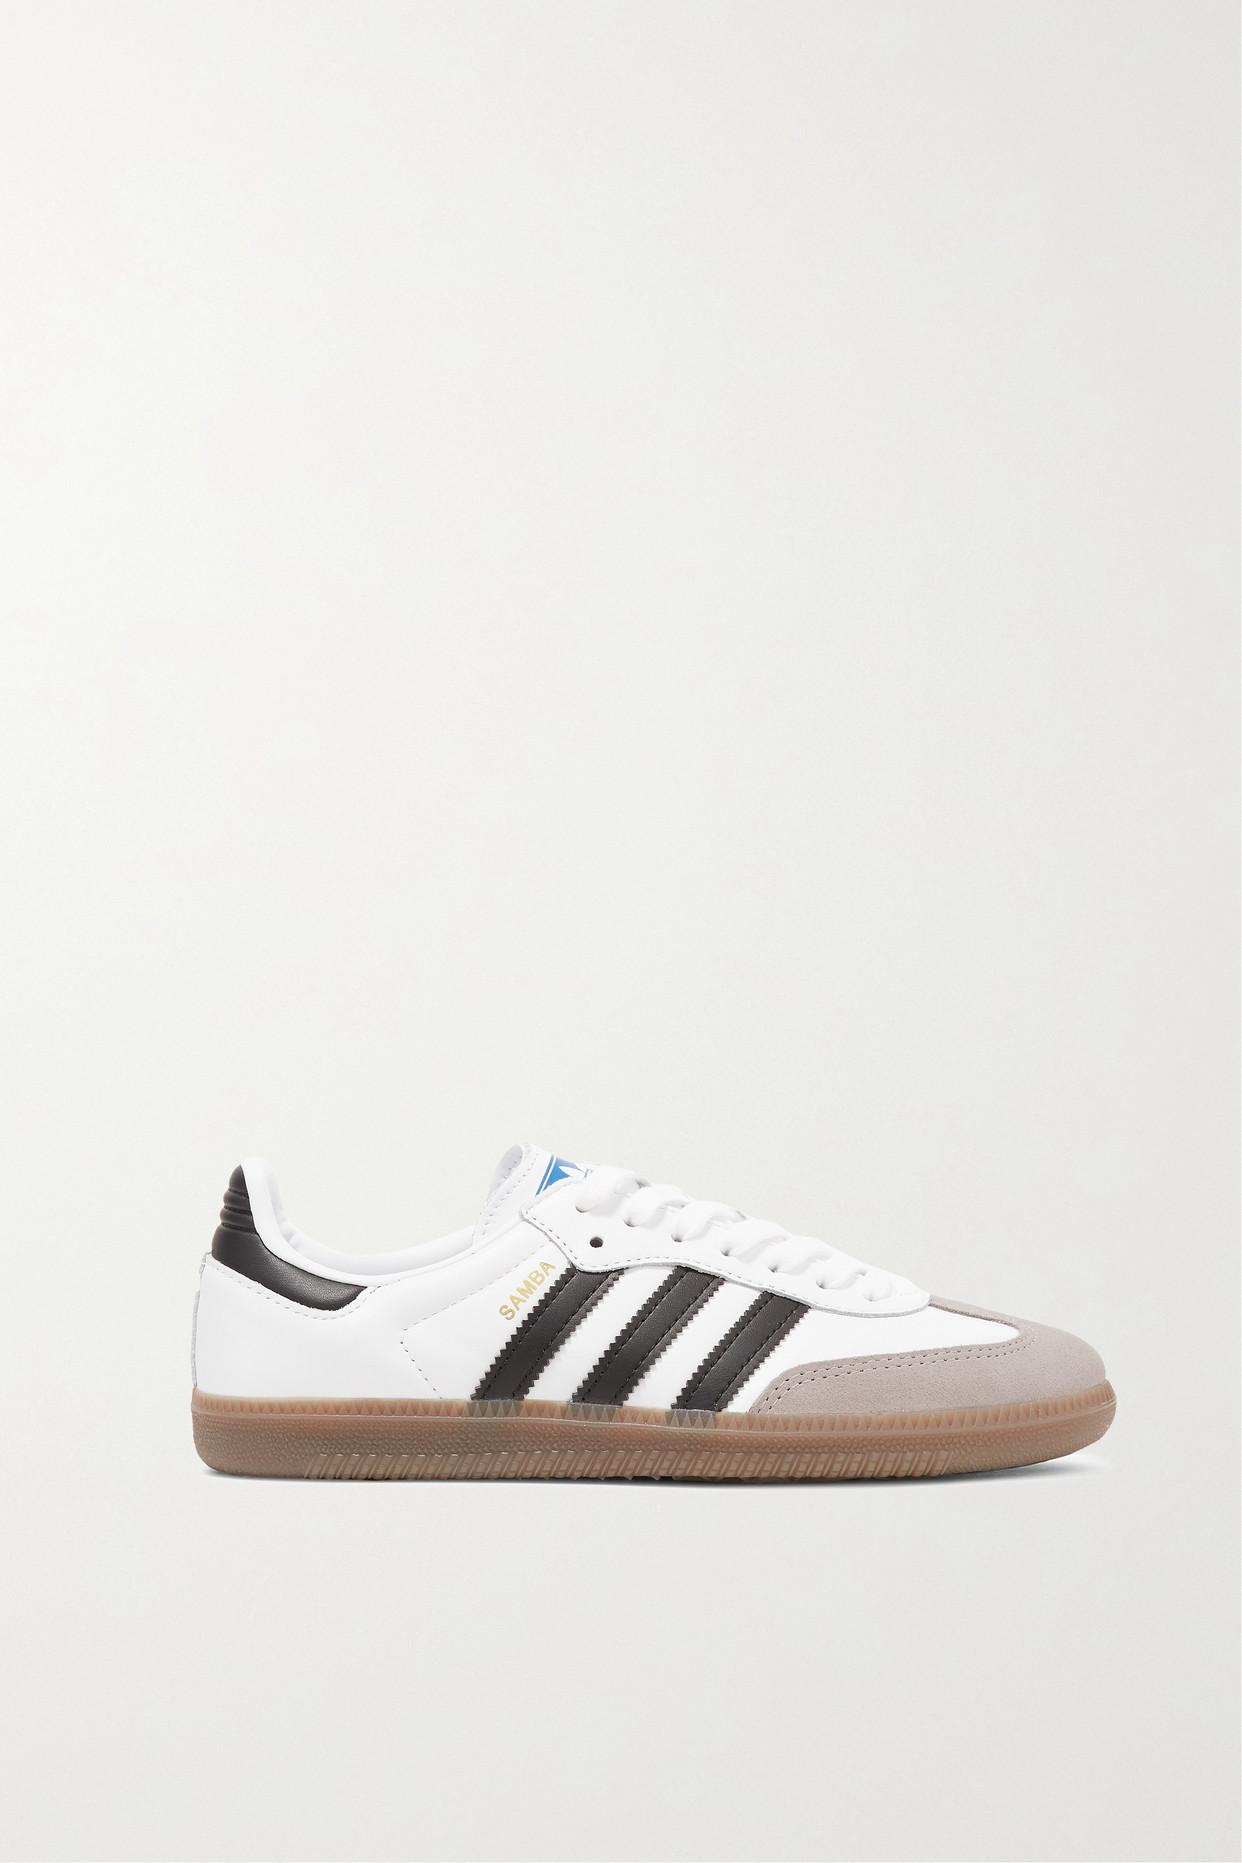 adidas Originals Samba Og Leather And Suede Sneakers in White | Lyst